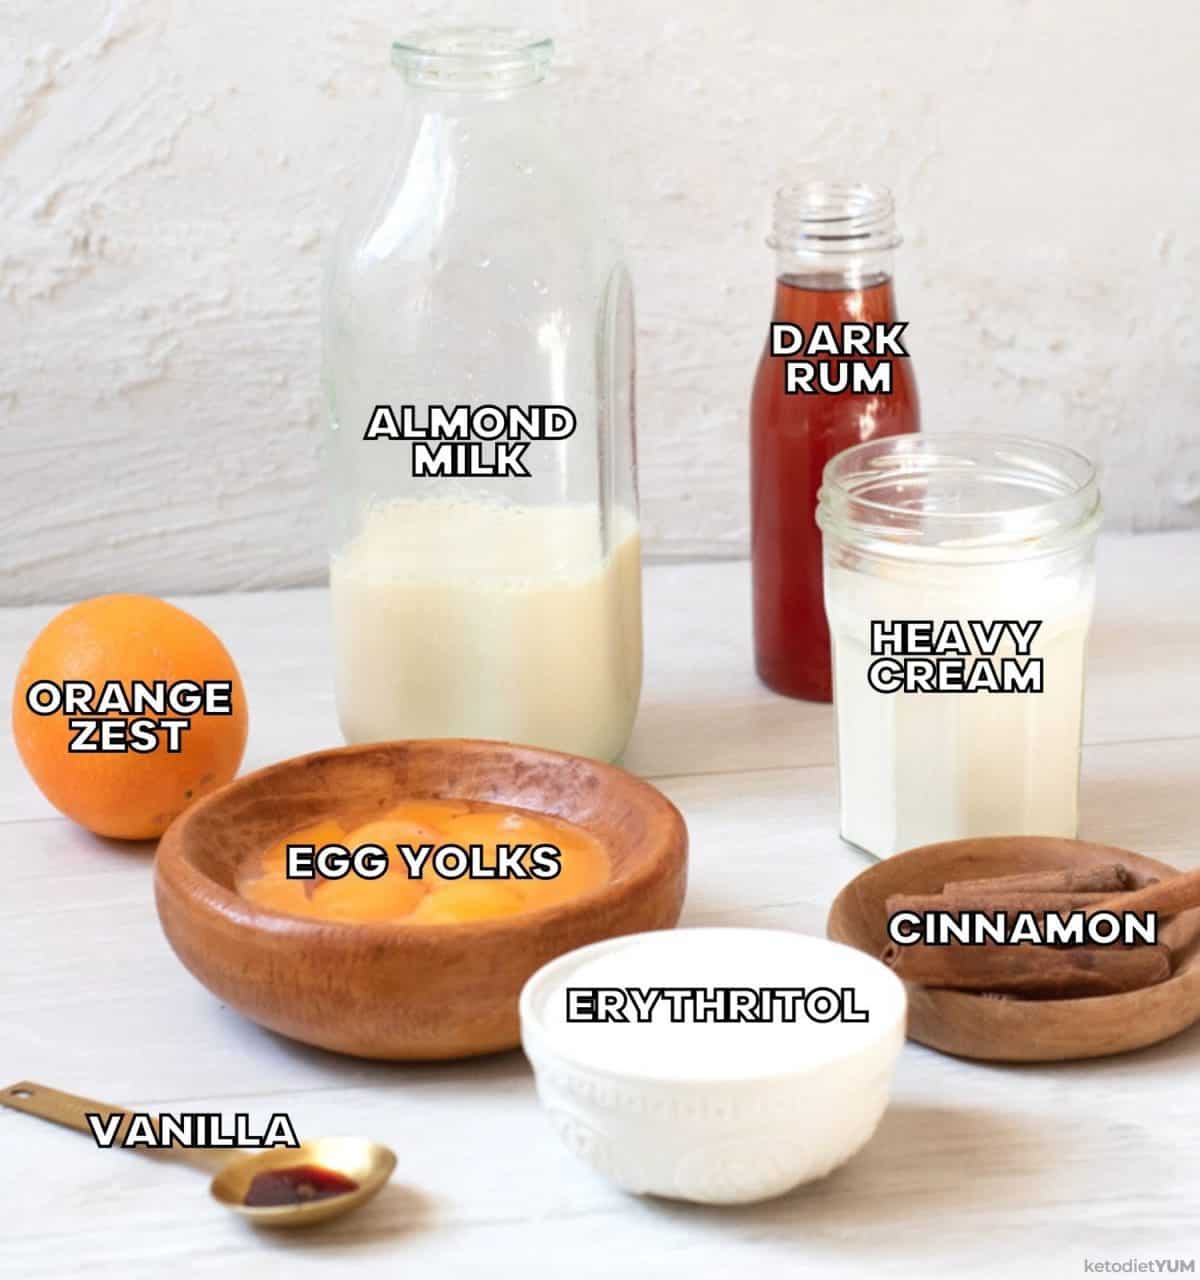 Ingredients you need to make an eggnog cocktail that is low carb and keto friendly